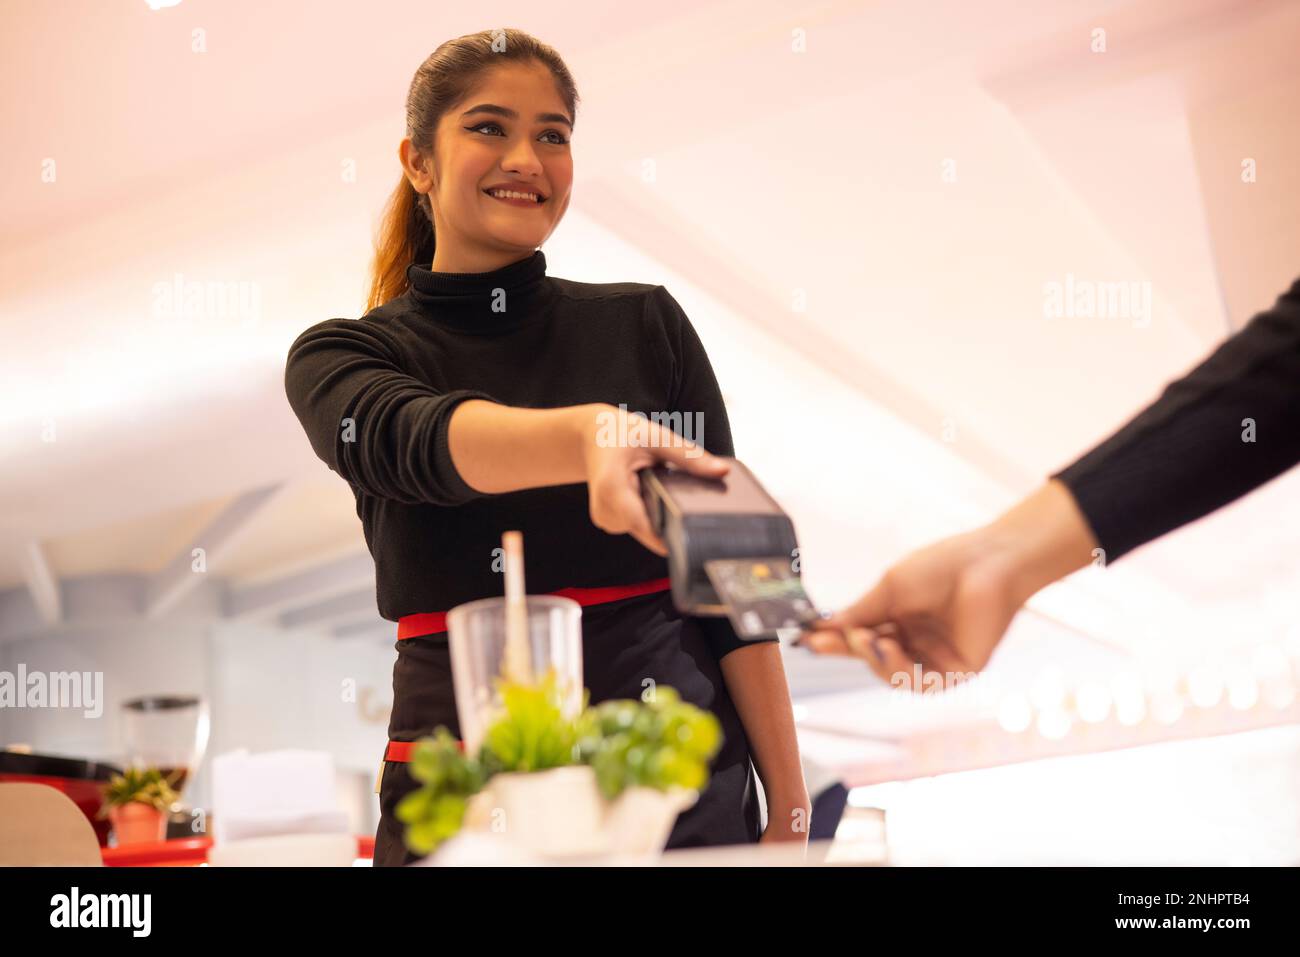 Waitress holding card reader while customer making payment through credit card Stock Photo